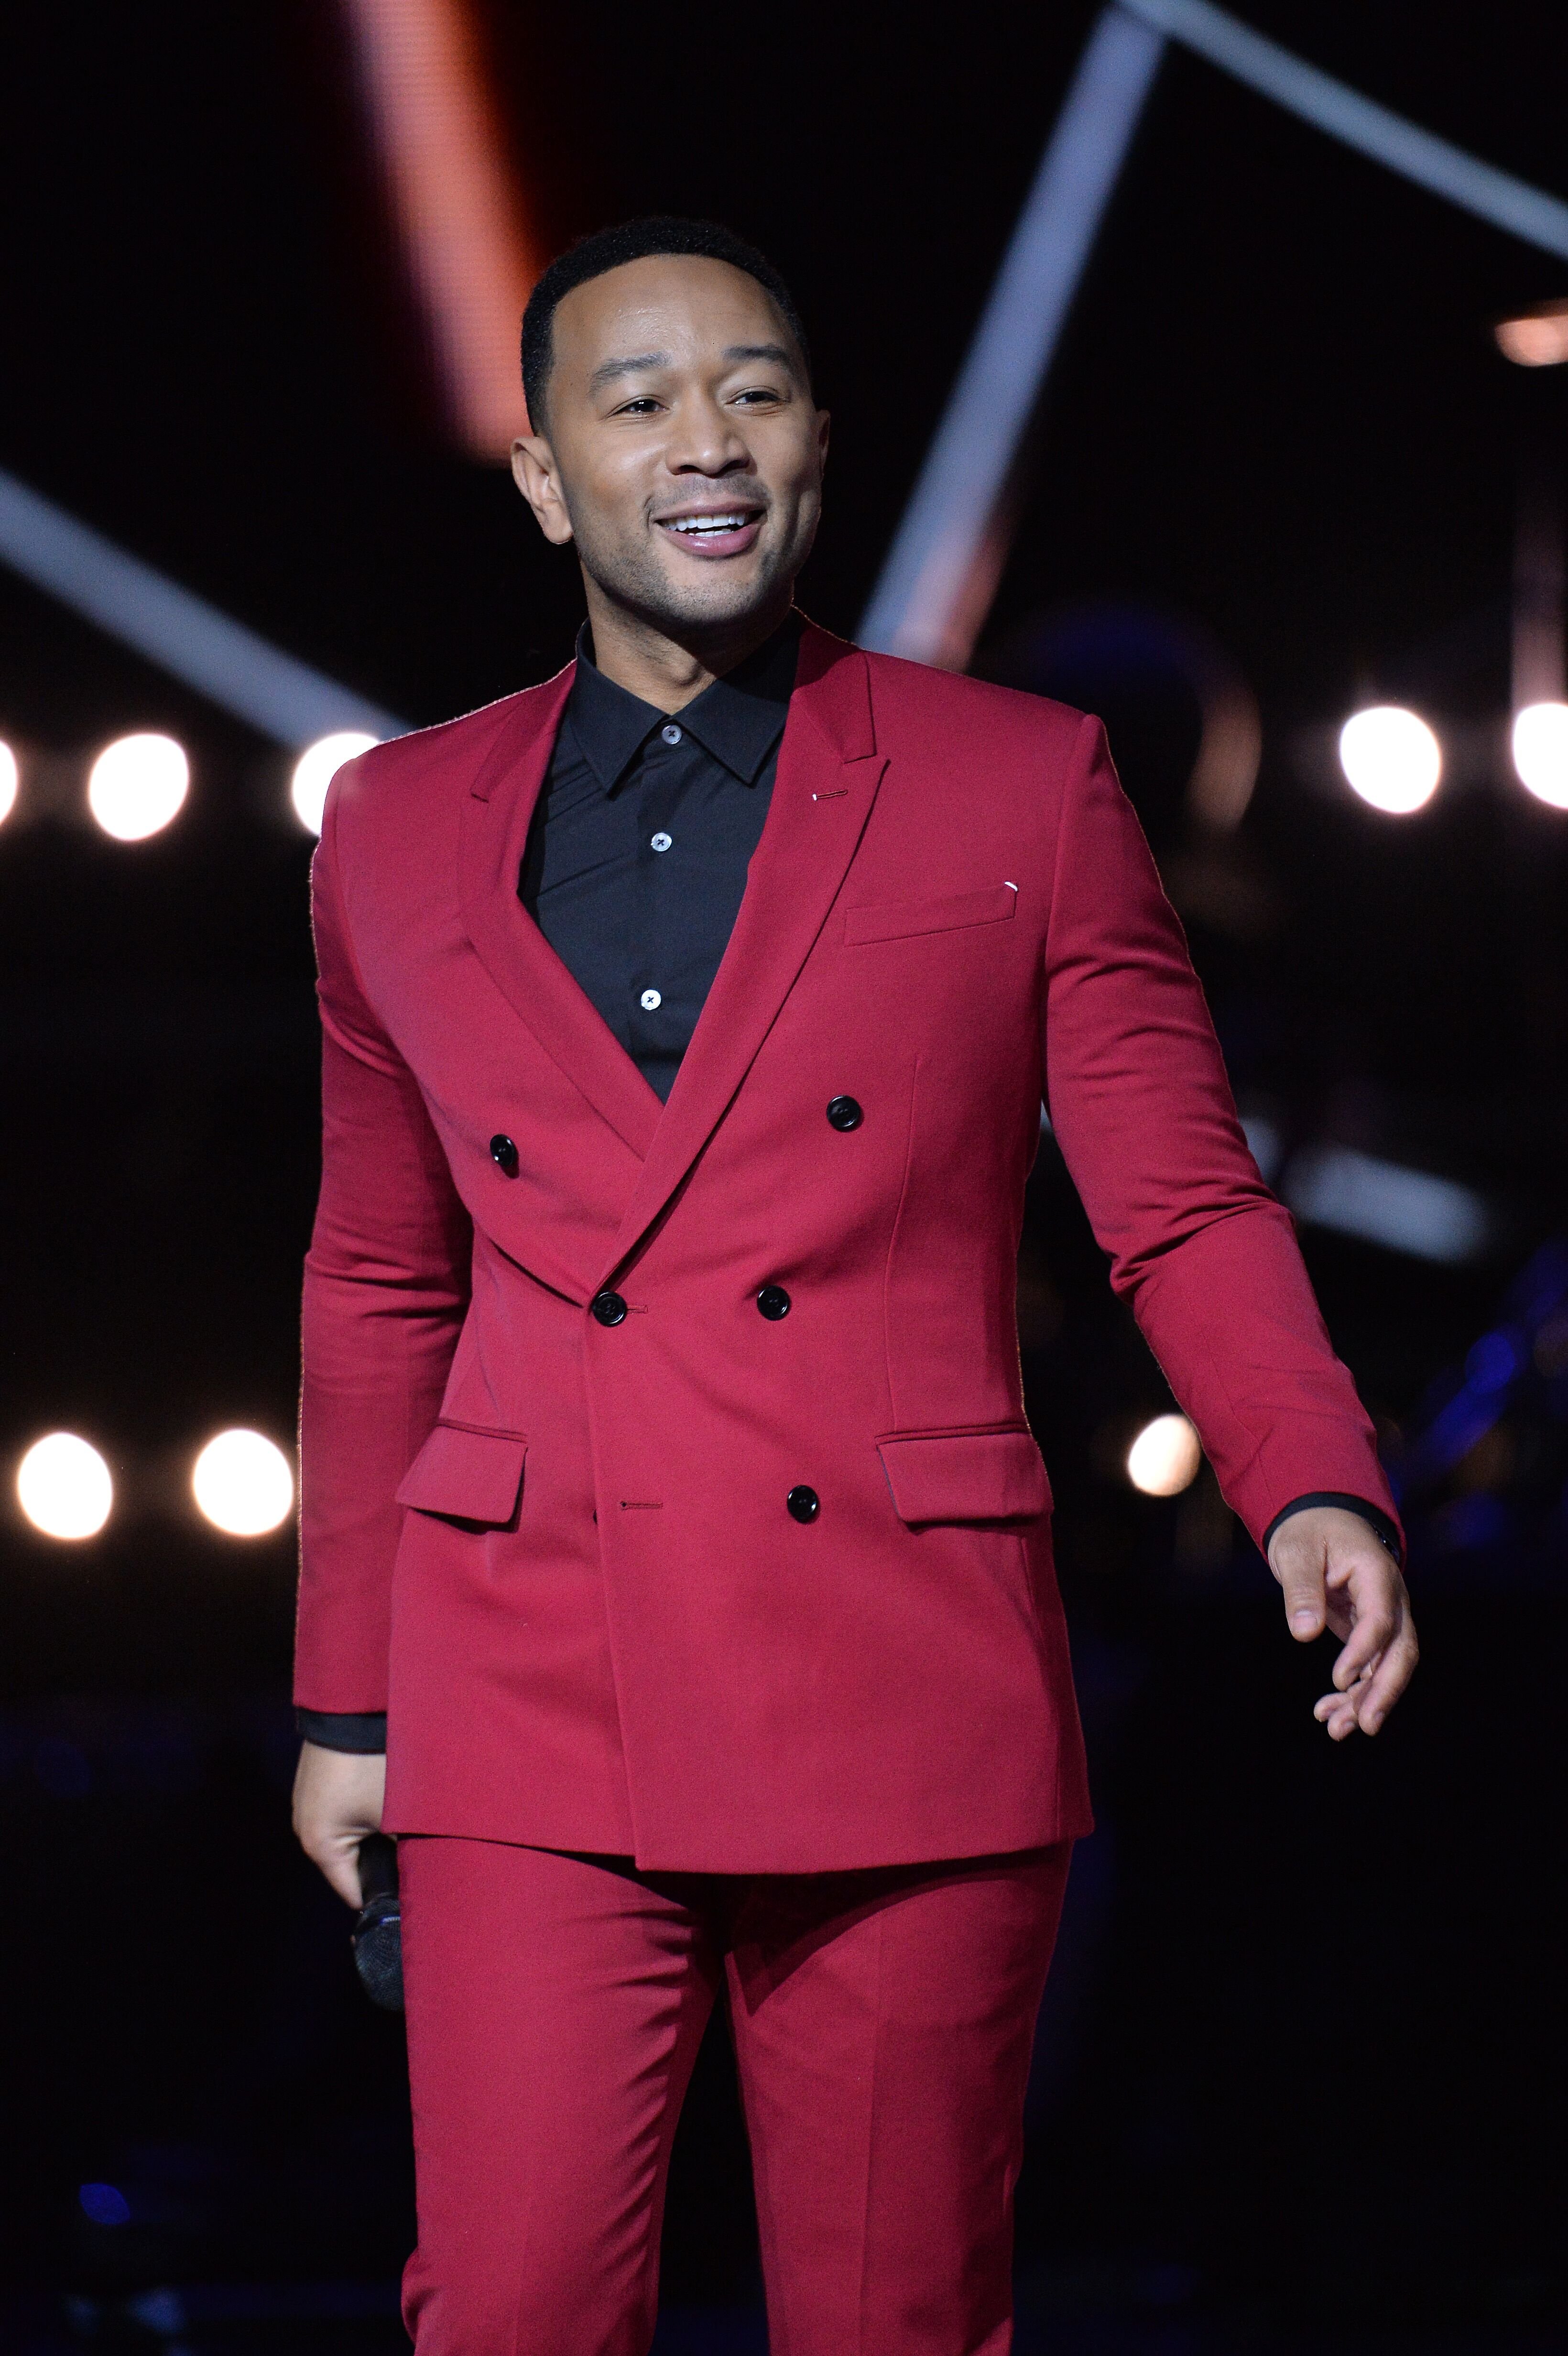 John Legend at the Global Citizen Prize at the Royal Albert Hall on December 13, 2019, in London, England | Photo: Jeff Spicer/Getty Images